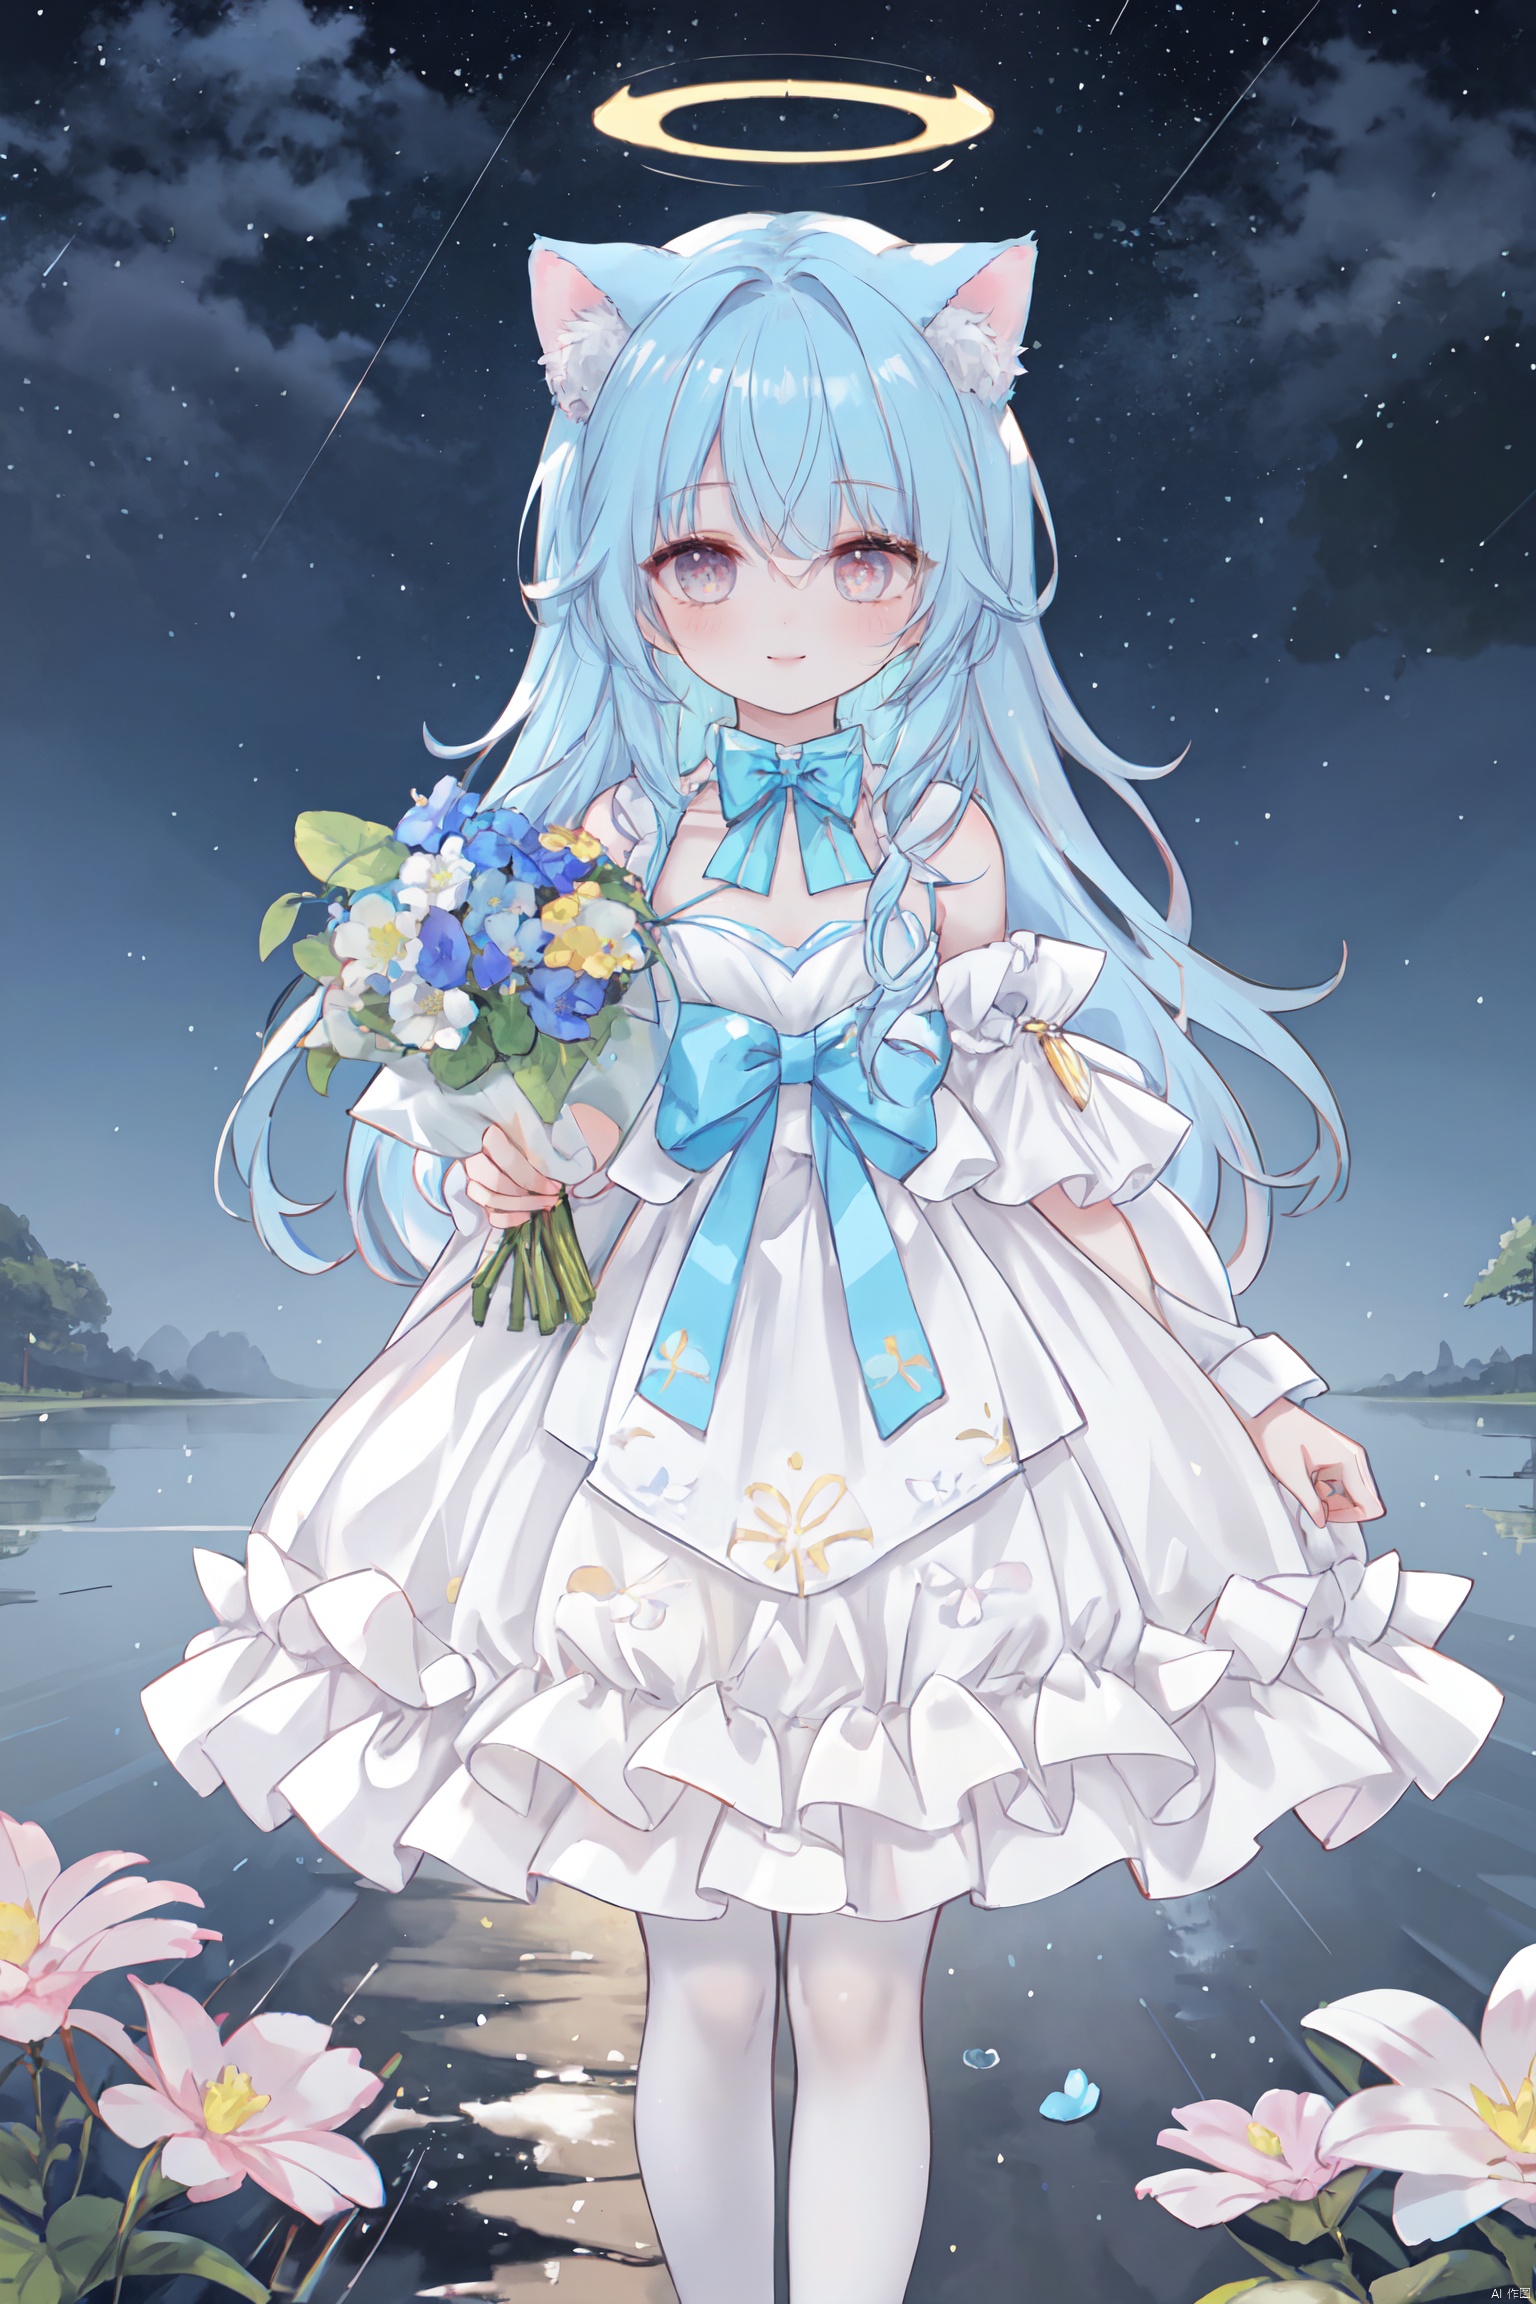 masterpiece, best quality, masterpiece,best quality,official art,extremely detailed CG unity 8k wallpaper, in spring, sun, moon, rain, sky, beautiful detailed sky, beautiful detailed water, flower field, Rivers, stars, endless flowers, a big tree, in the middle, under a big tree, a girl,long hair, disheveled hair, Blue hair, Gradient, white,Inclined bangs,bow tie,Eyes, green, gradient, gold, beautiful detail eyes, sparkling eyes, watery eyes,Stars in the eyes,the White Cat Ears,Smile up to the sky, hold a bouquet,chest, medium chest, gown, with floral pattern, white, gradient, light pink, pleated skirt, white, white stockings, board shoes,(three-dimensional), (layering), (picture), garland, light rays, flowers, BY MOONCRYPTOWOW,HALO